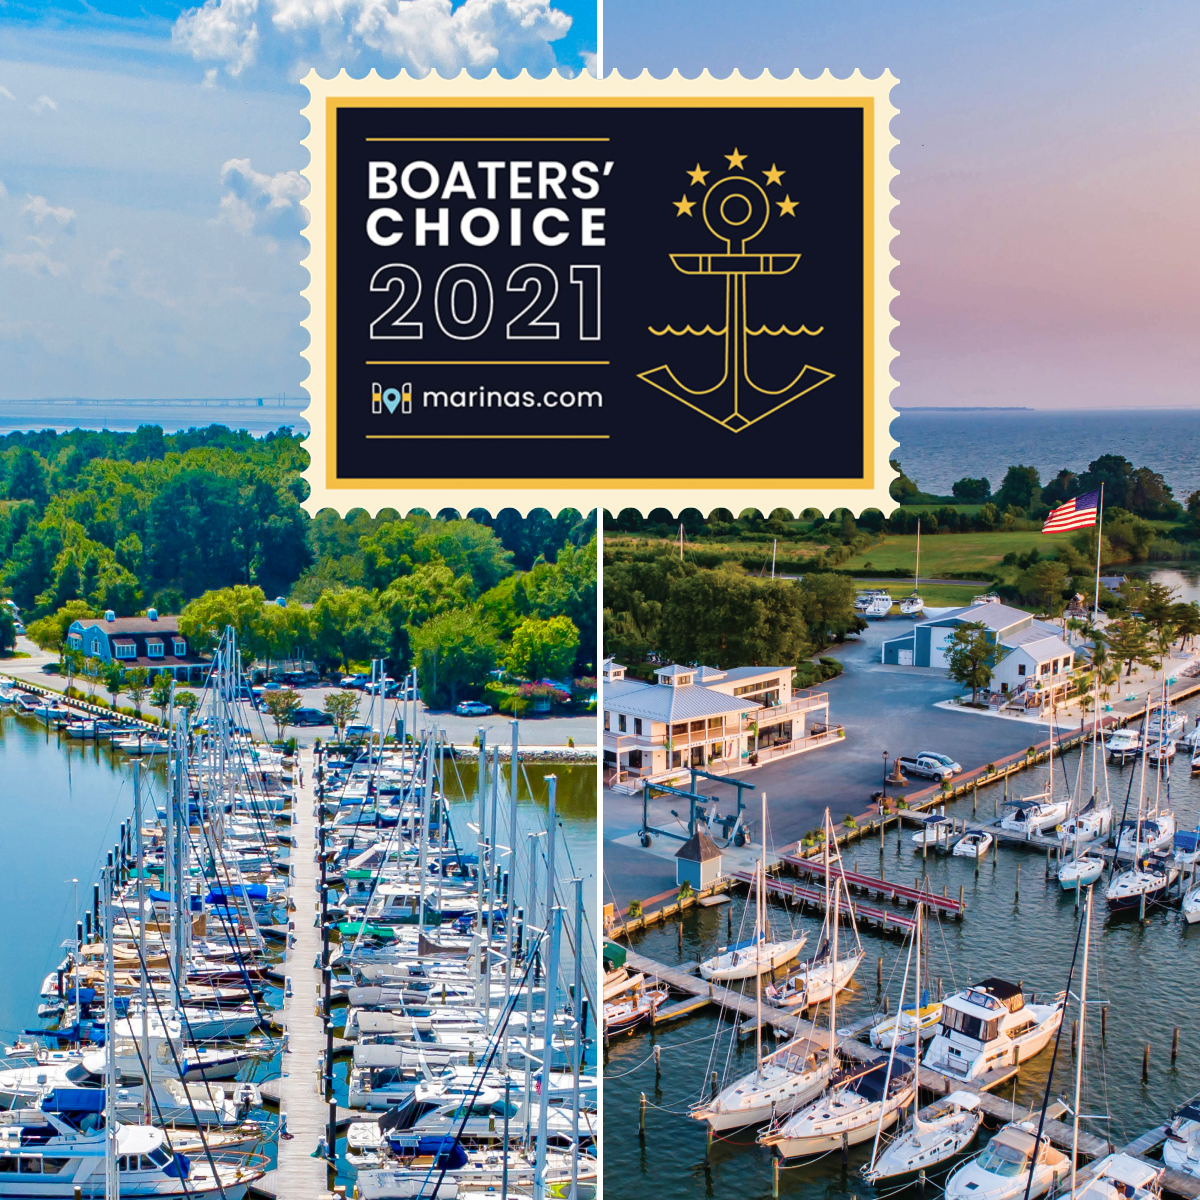 Marinas.com awards annual winners with a badge for public display